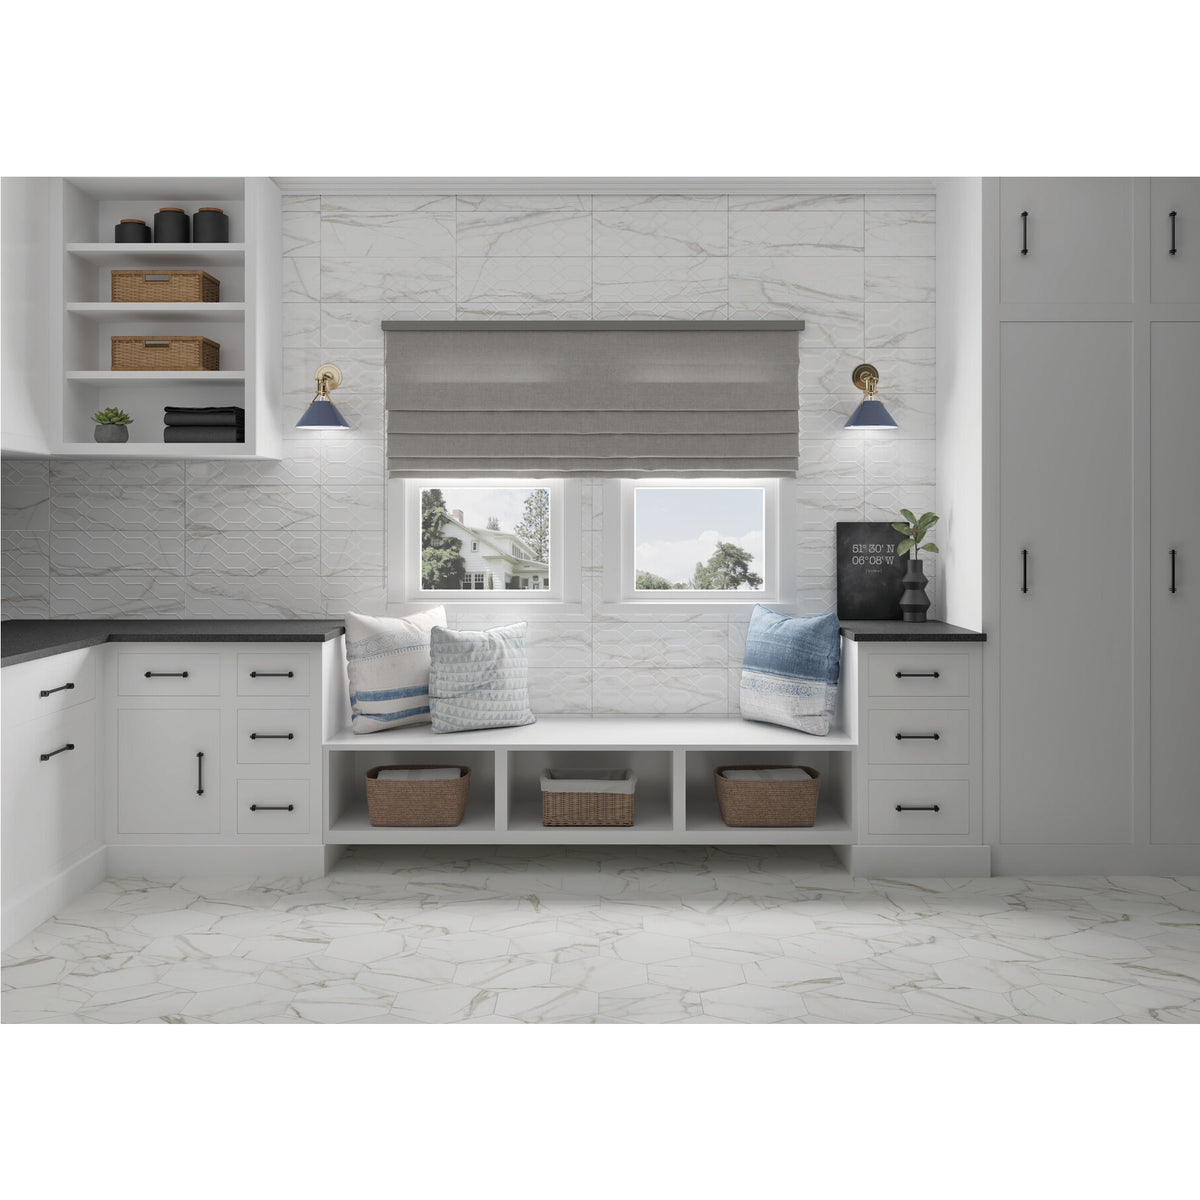 American Olean - Mythique Marble 12 in. x 24 in. Colorbody Porcelain Tile - Calacatta Venecia Matte Room Scene